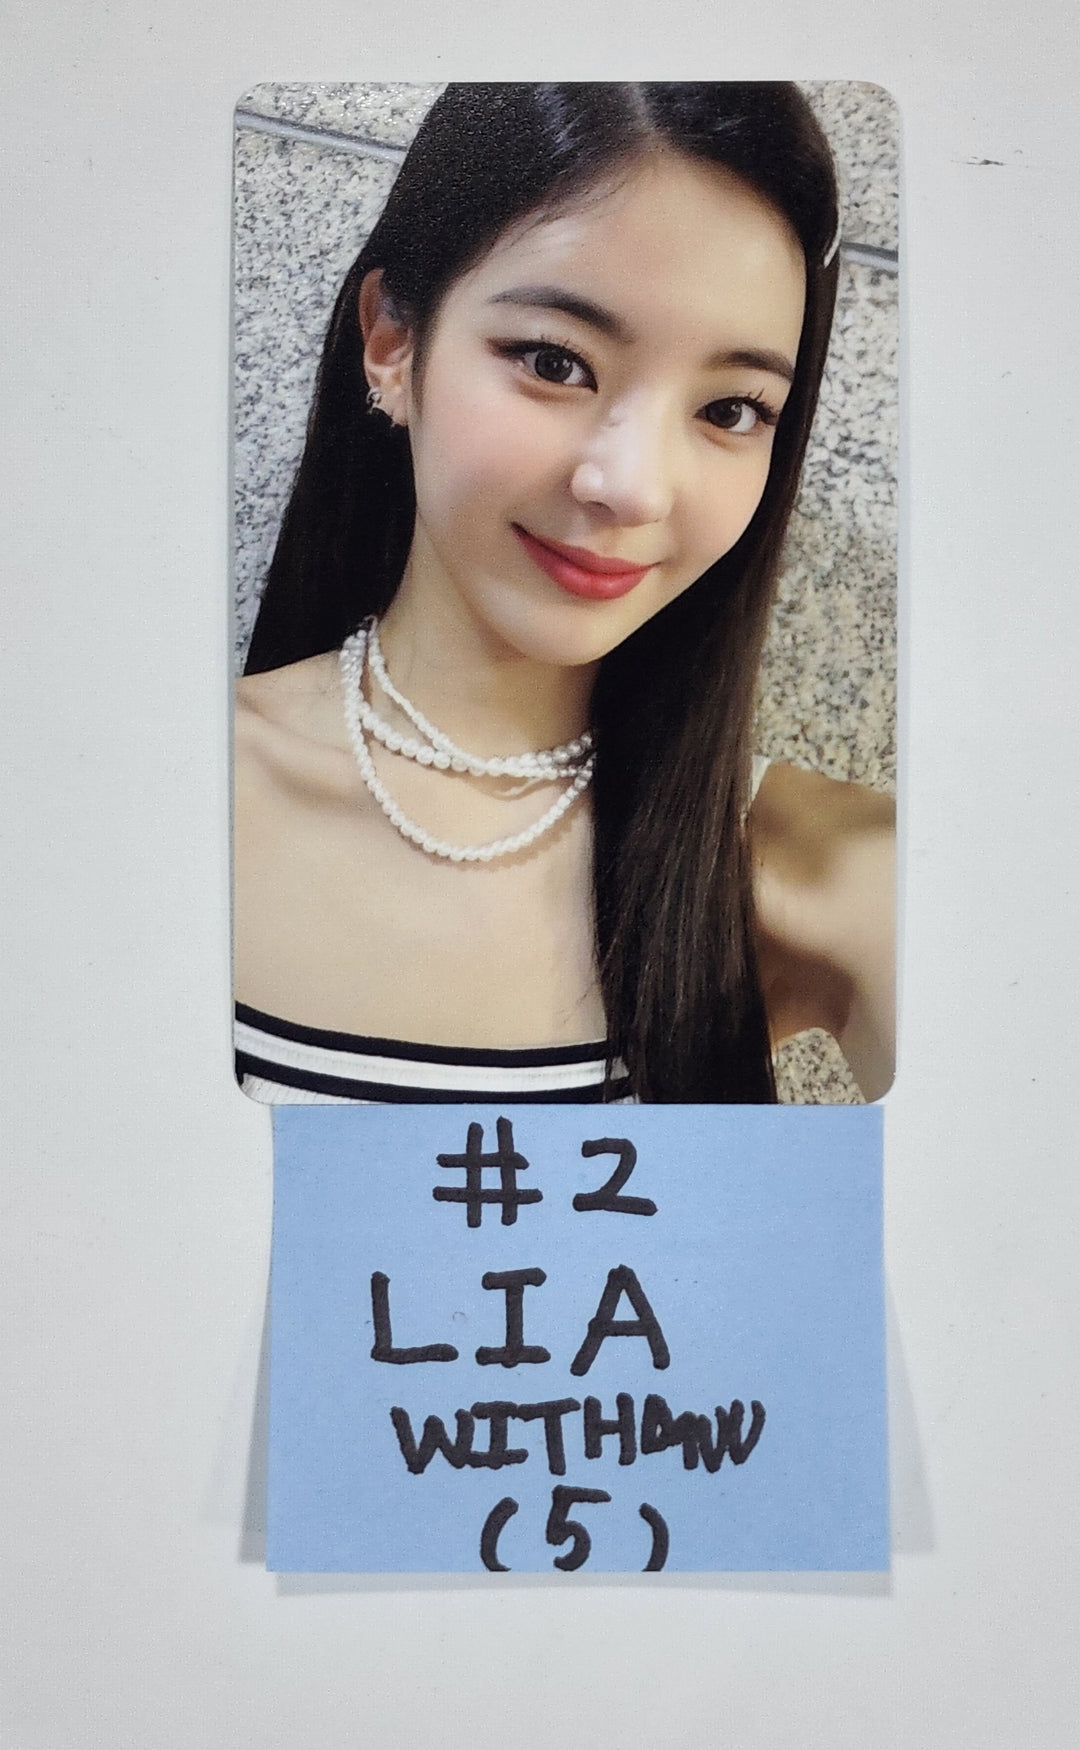 ITZY 'CHECKMATE' - Withmuu Fansign Event Photocard Round 3